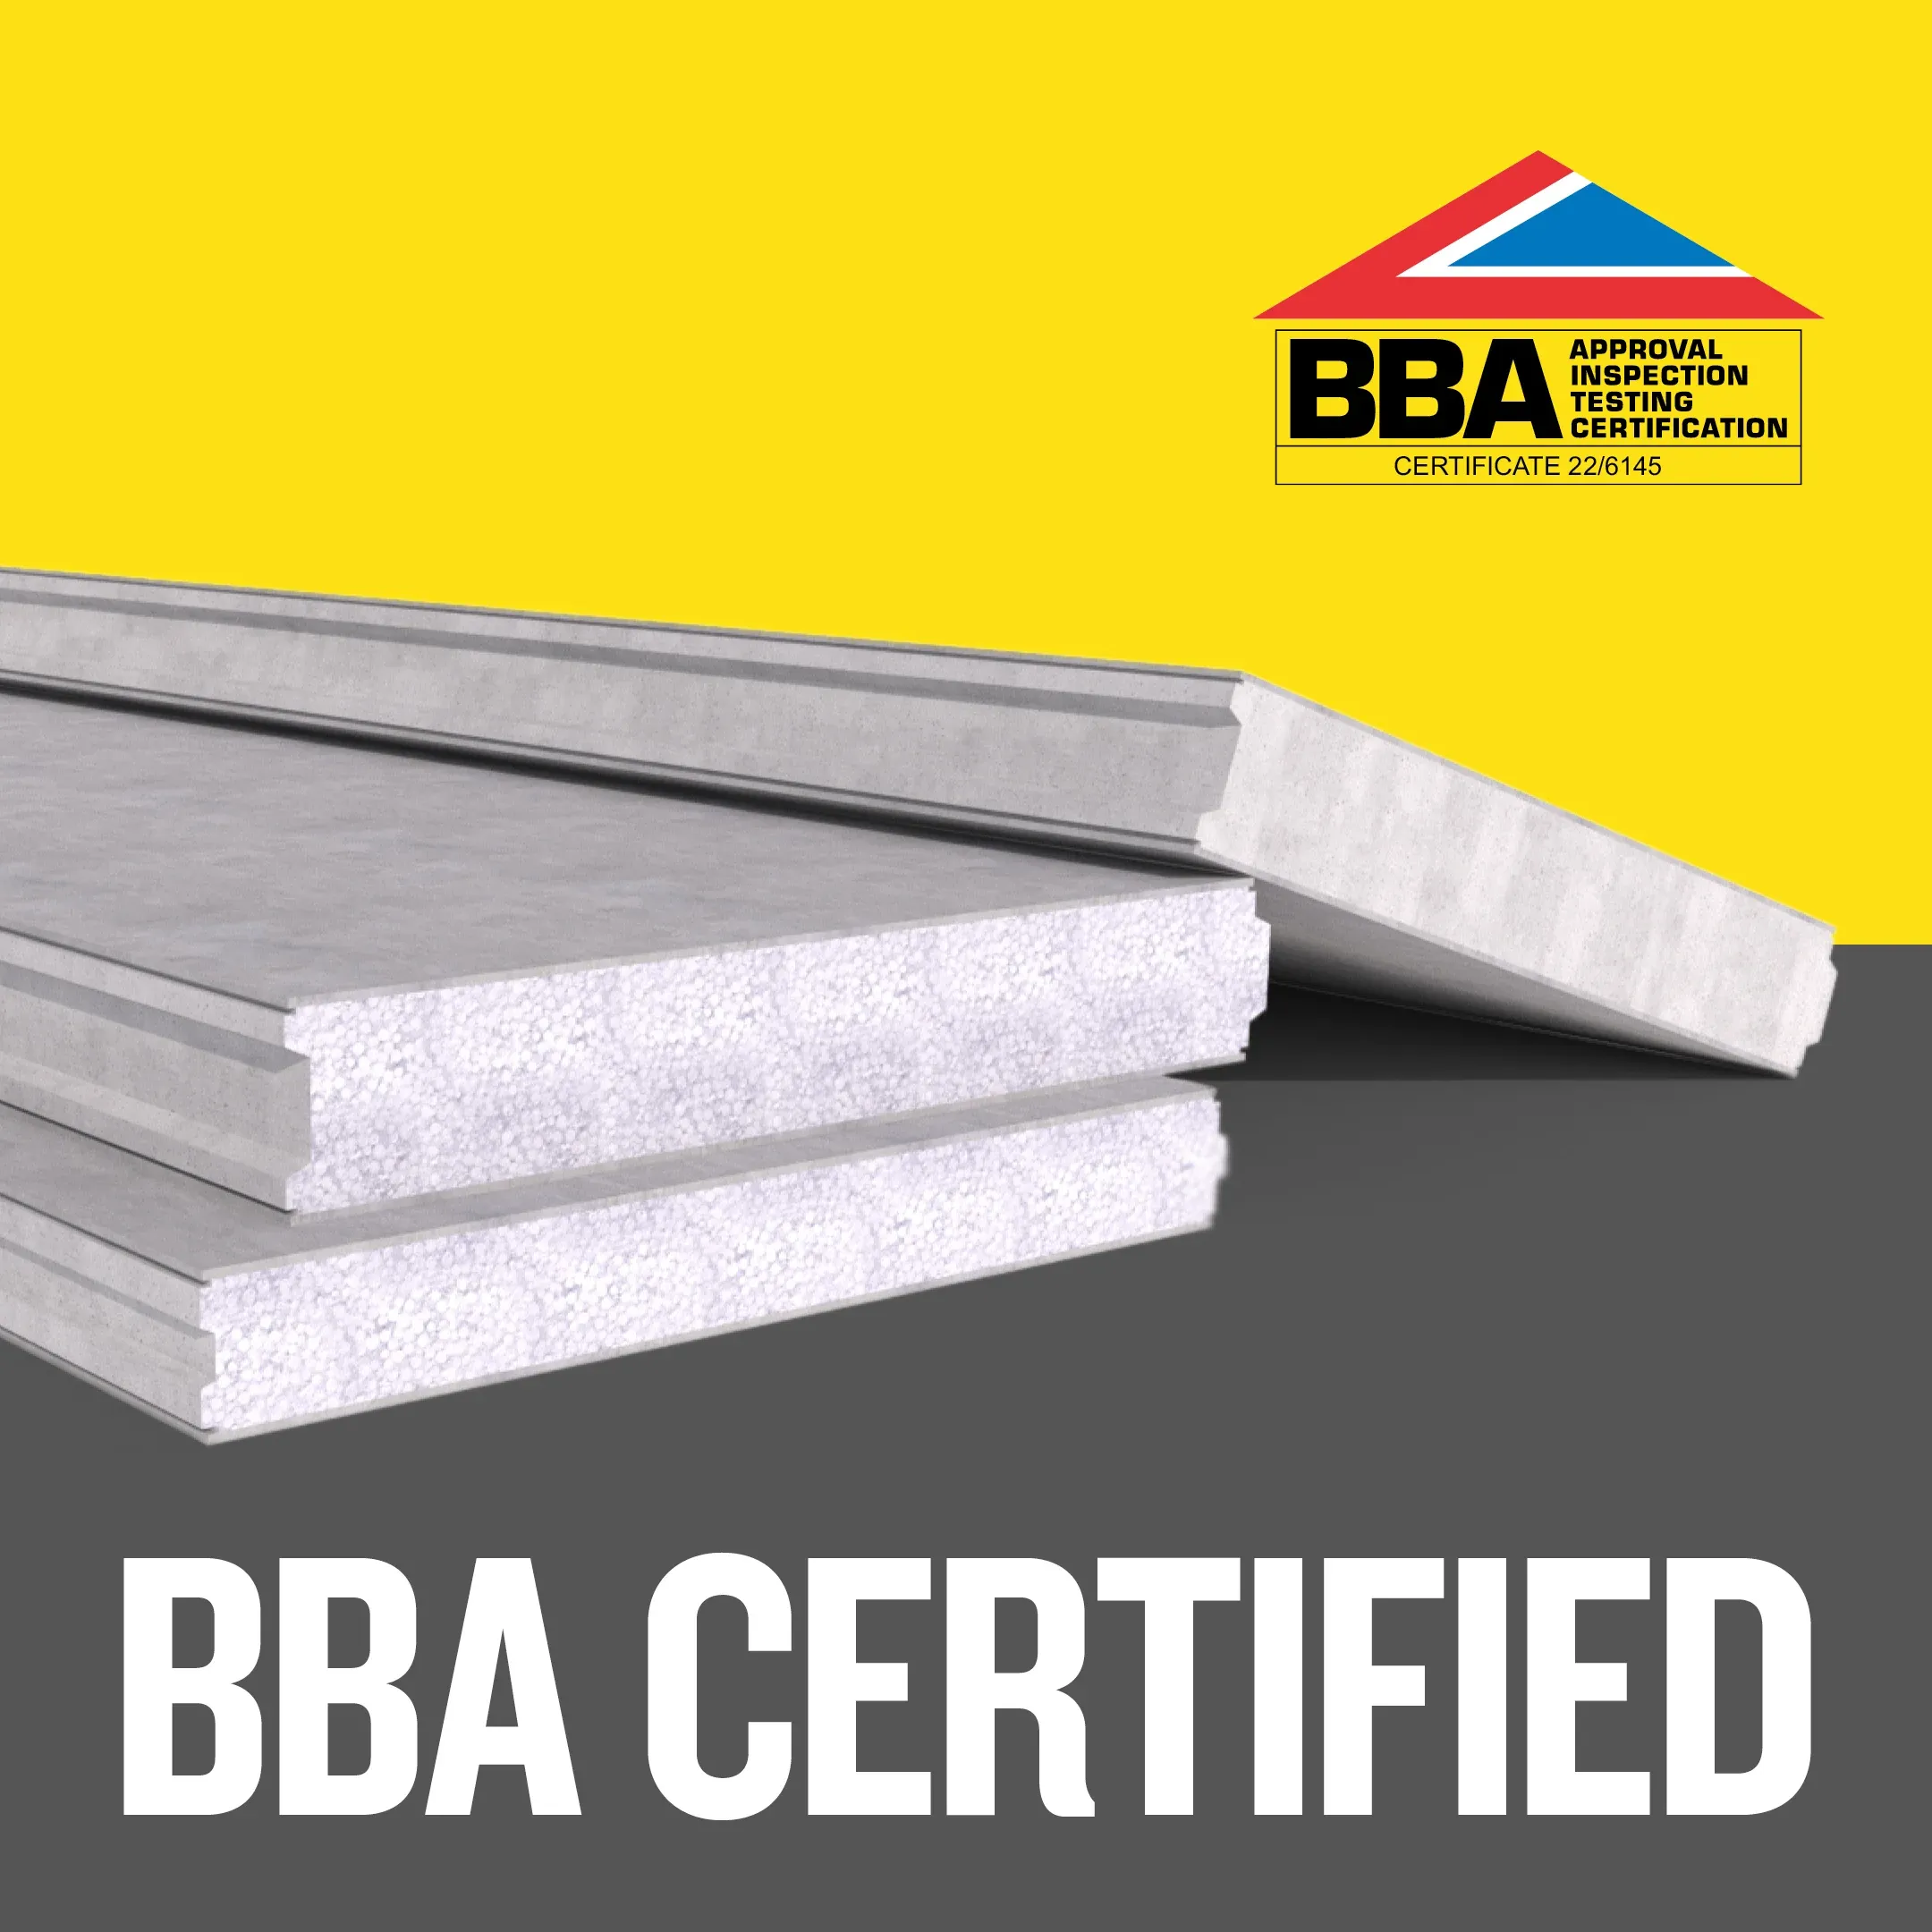 Specwall is BBA certified - what does this accreditation mean?